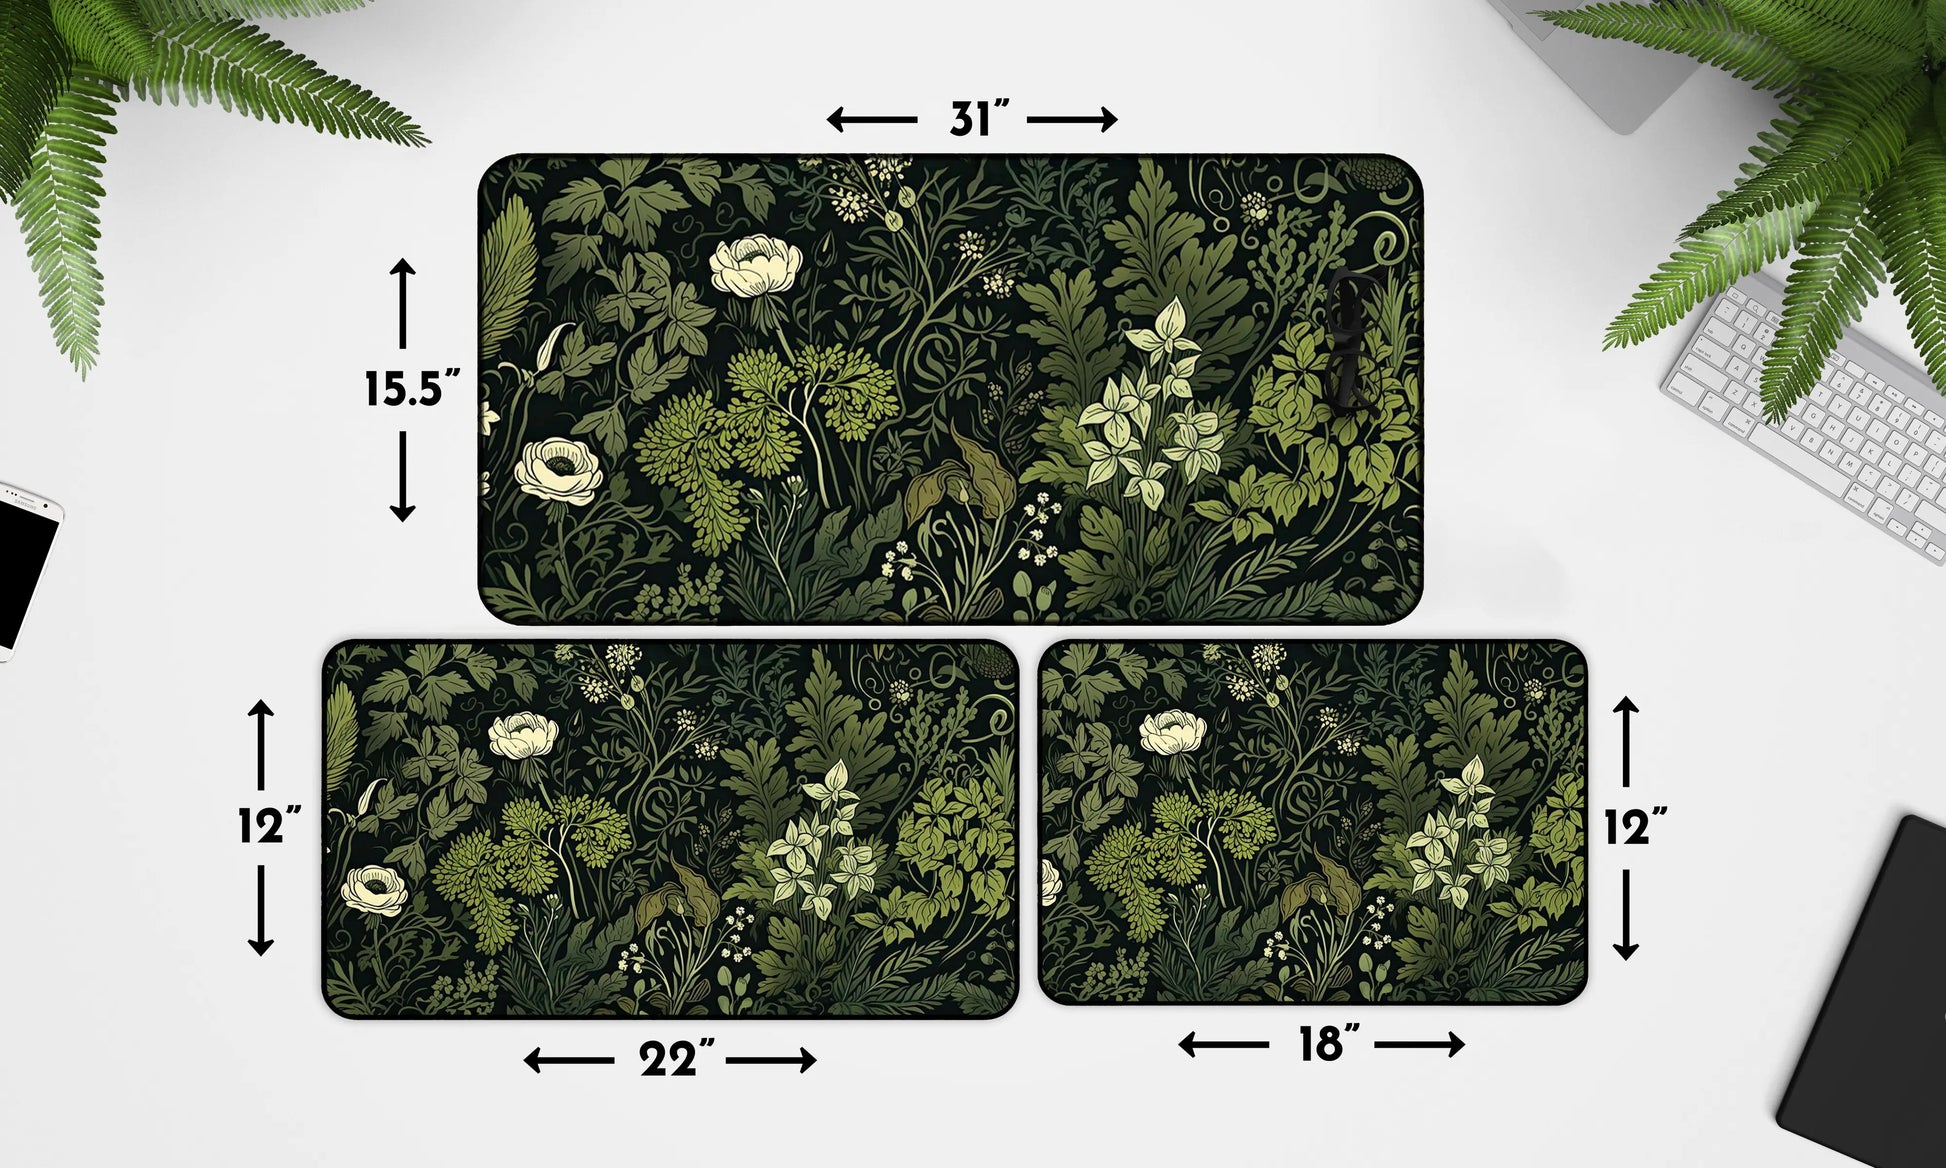 Graphic showing three different sizes of dark green floral-themed desk mats with dimensions: 31x15.5 inches, 22x12 inches, and 18x12 inches.